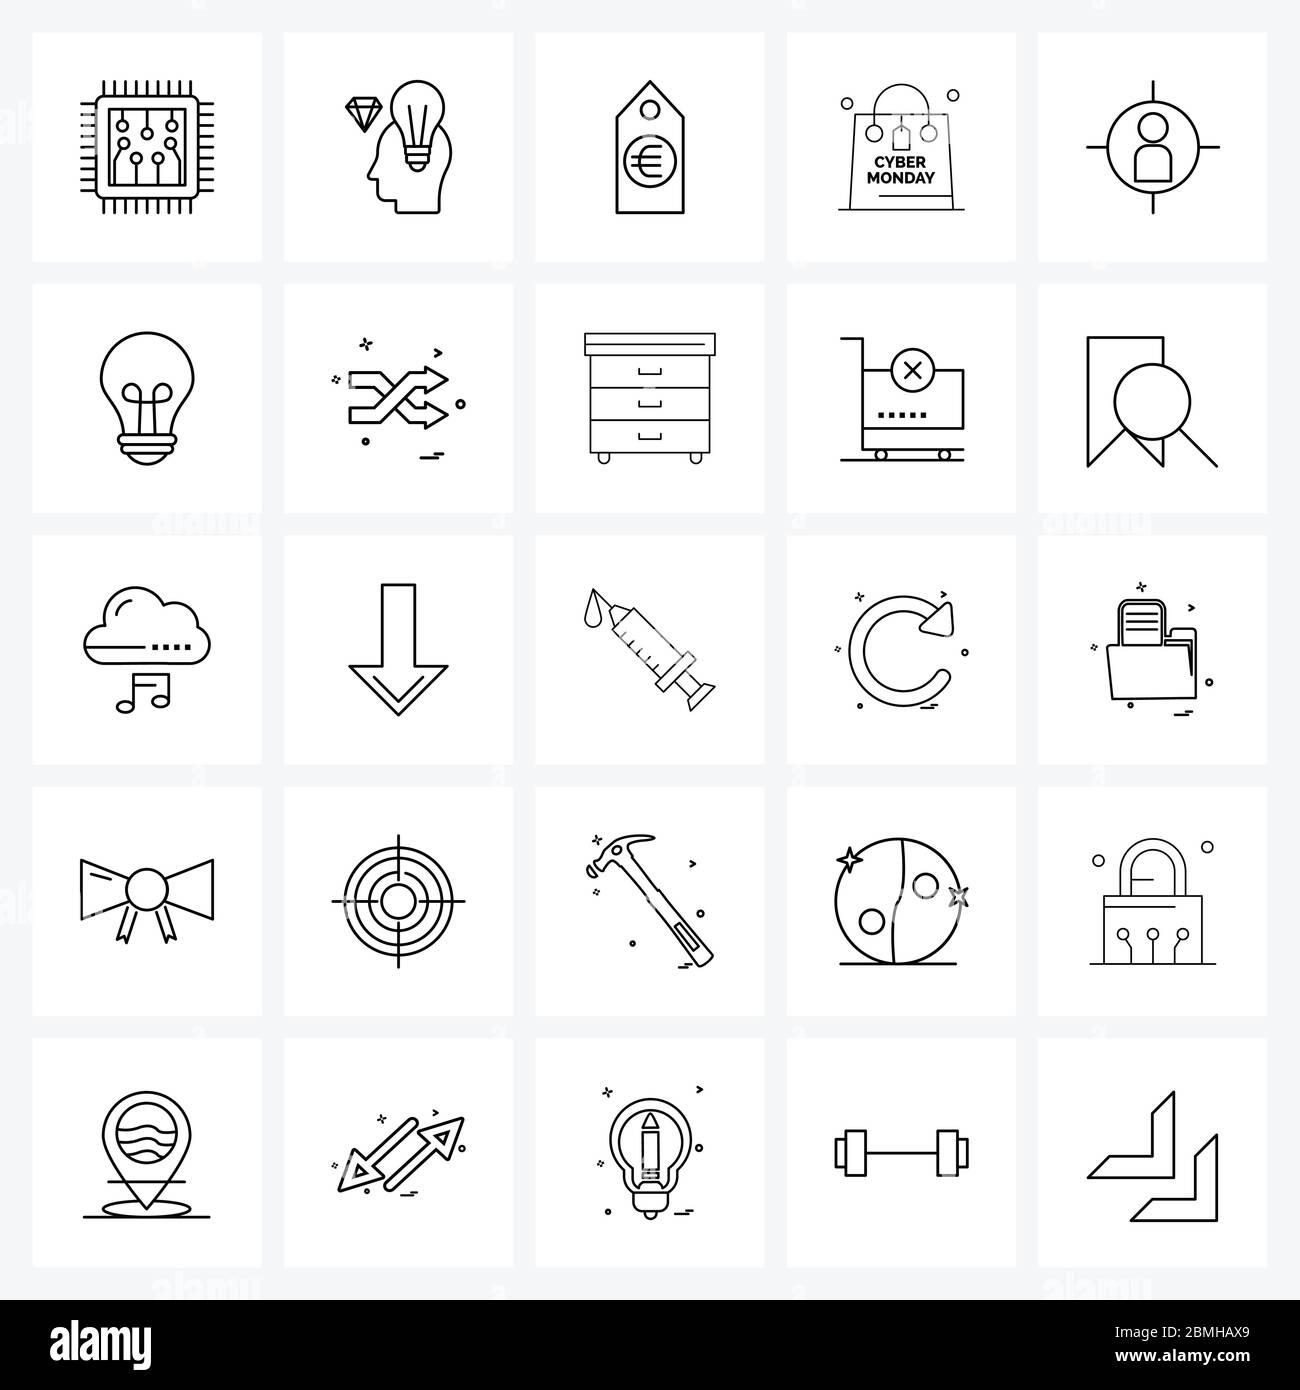 Universal Symbols of 25 Modern Line Icons of avatar, target, business ...